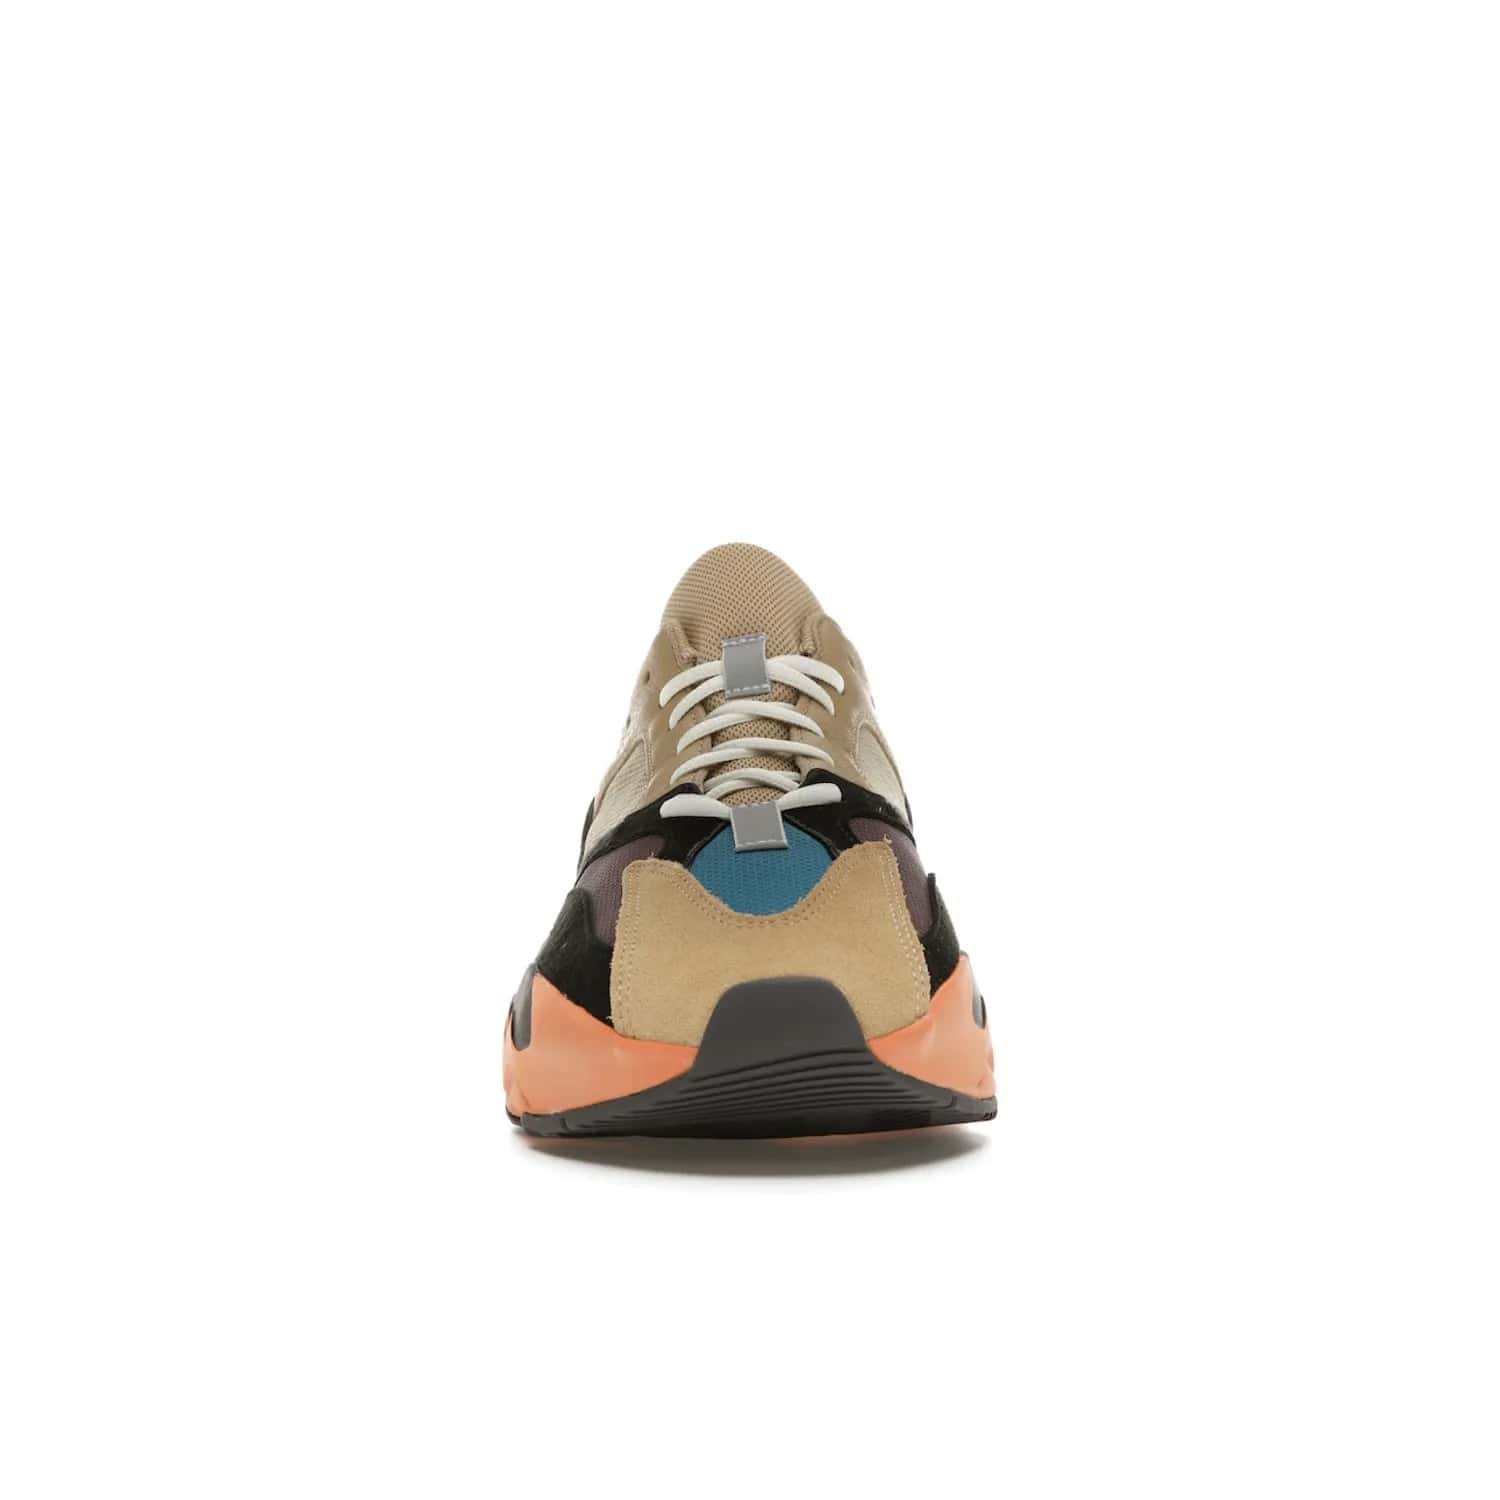 adidas Yeezy Boost 700 Enflame Amber - Image 10 - Only at www.BallersClubKickz.com - Adidas Yeezy Boost 700 Enflame Amber: Eye-catching design with pale yellow, brown, teal, and orange! Get yours in June 2021.